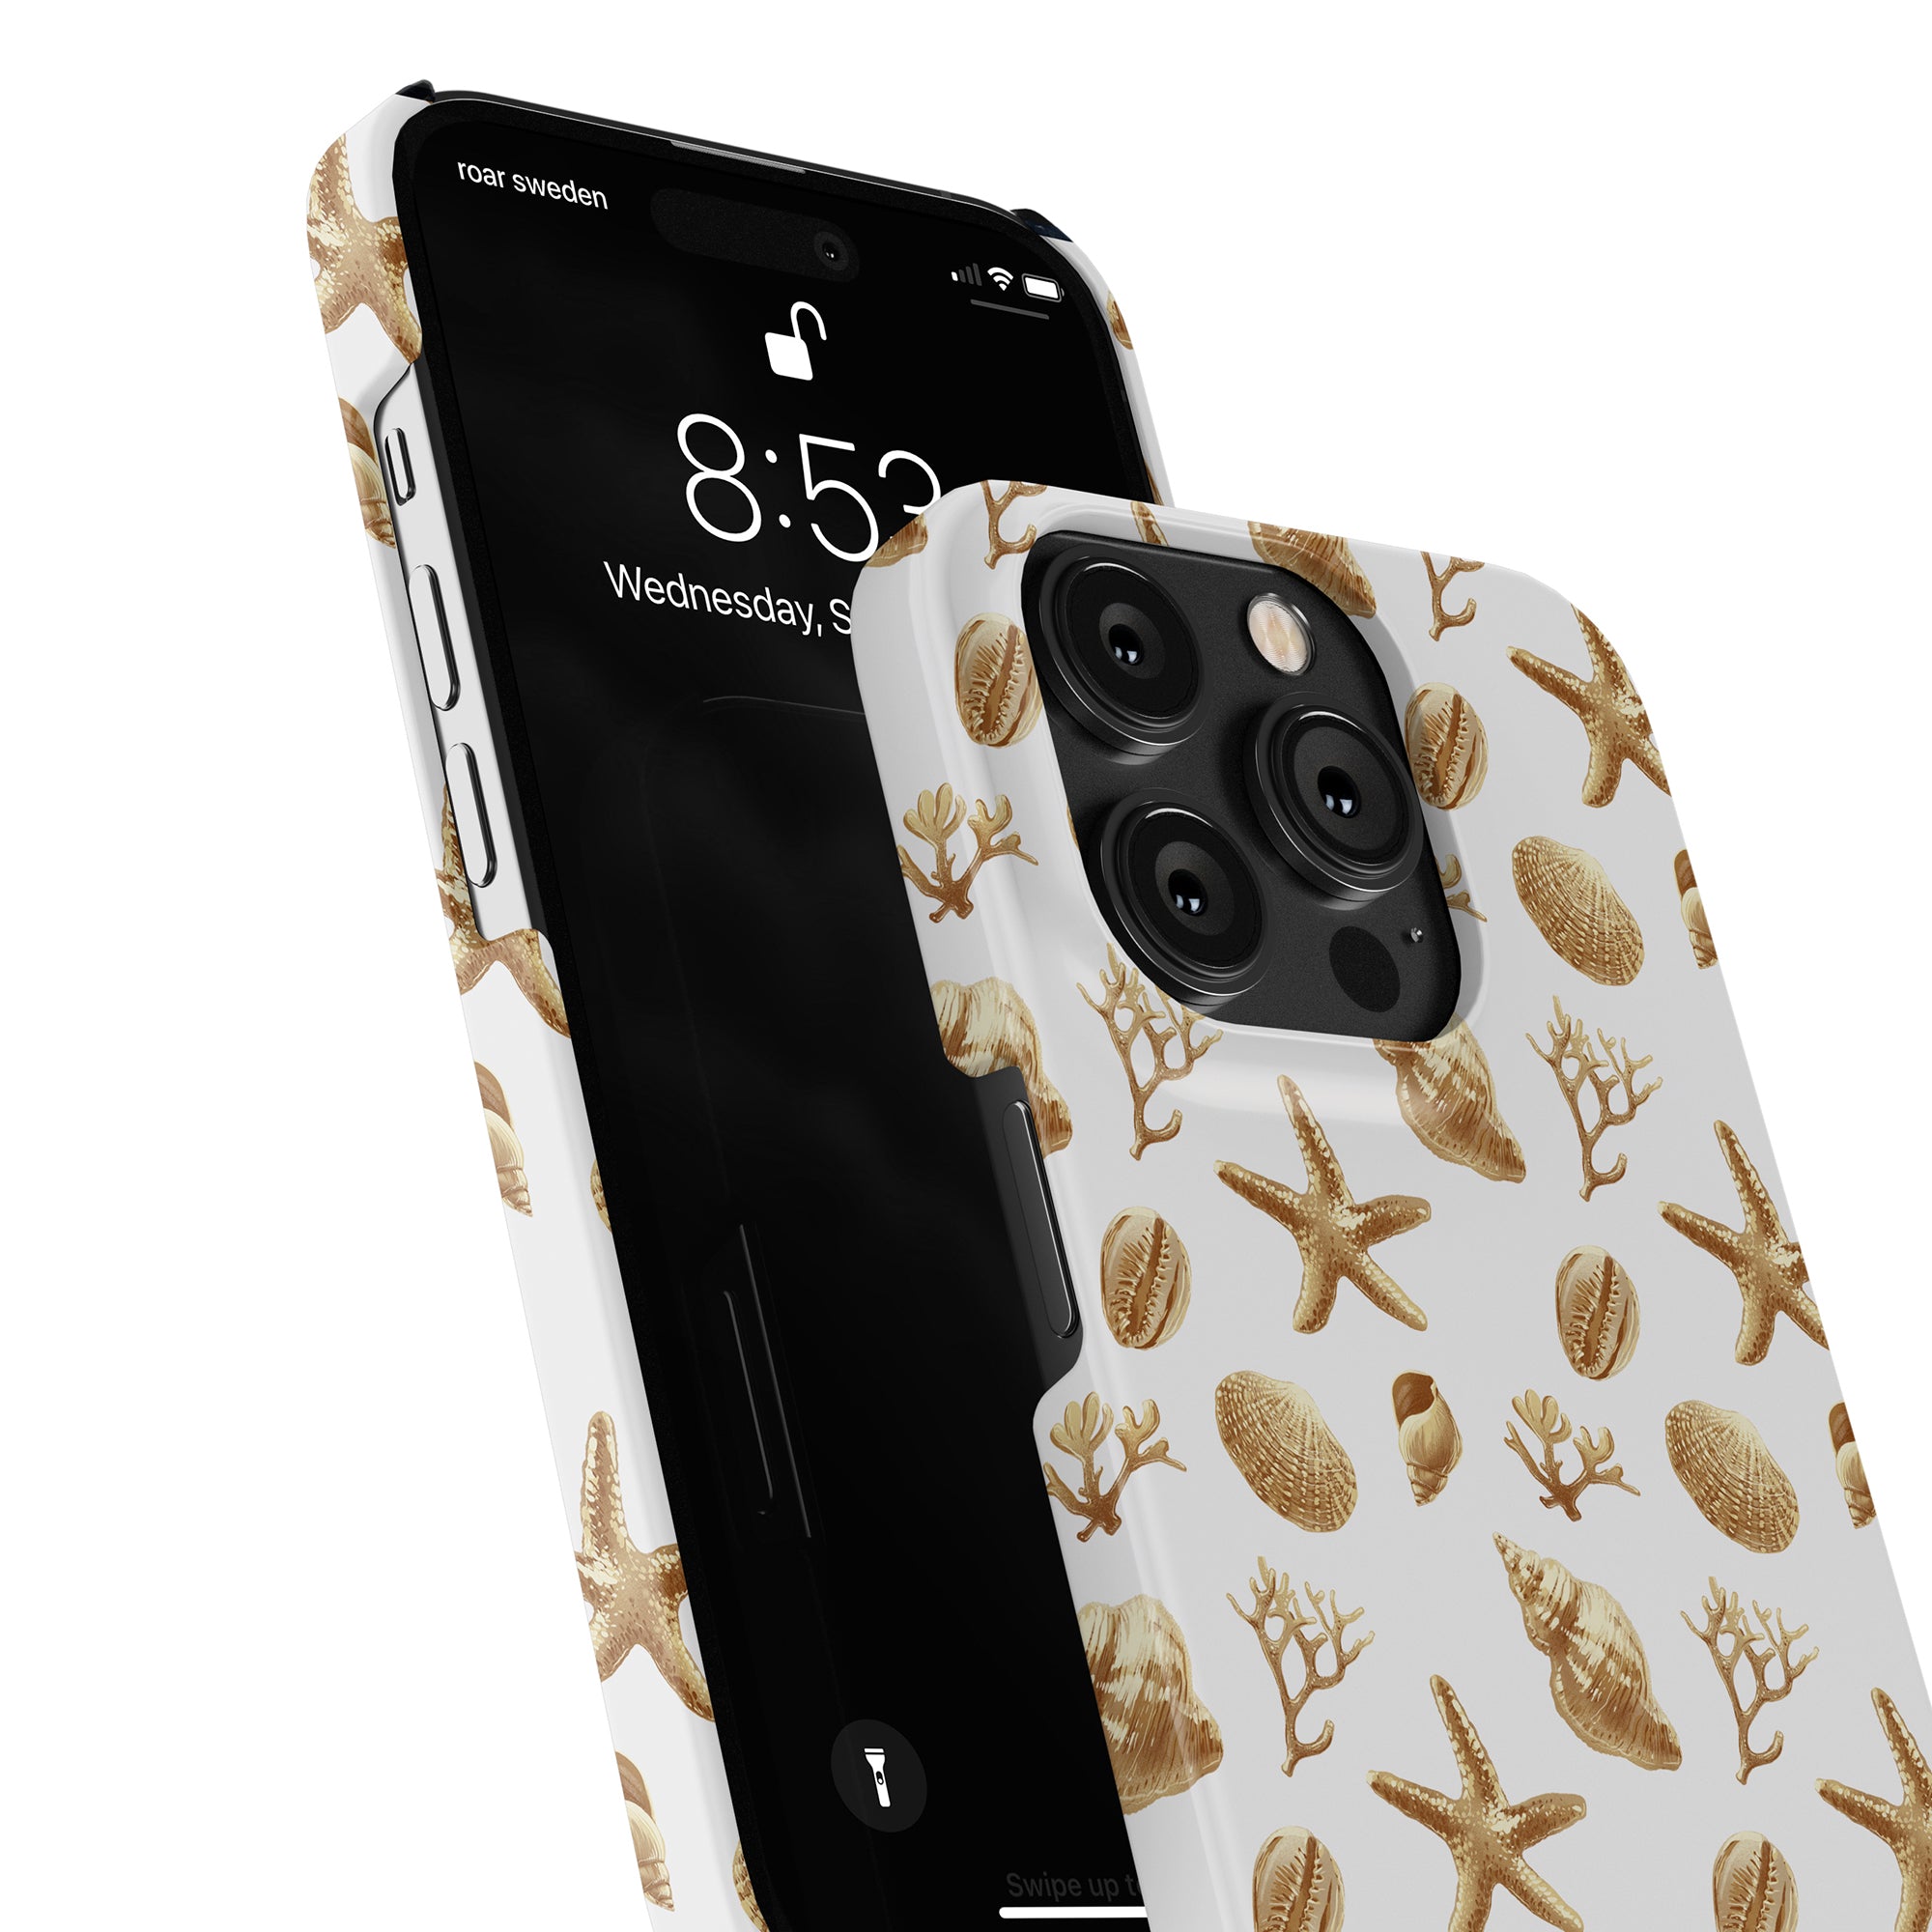 A smartphone with a Golden Shells - Slim case from the ocean collection, showing the lock screen time and date.